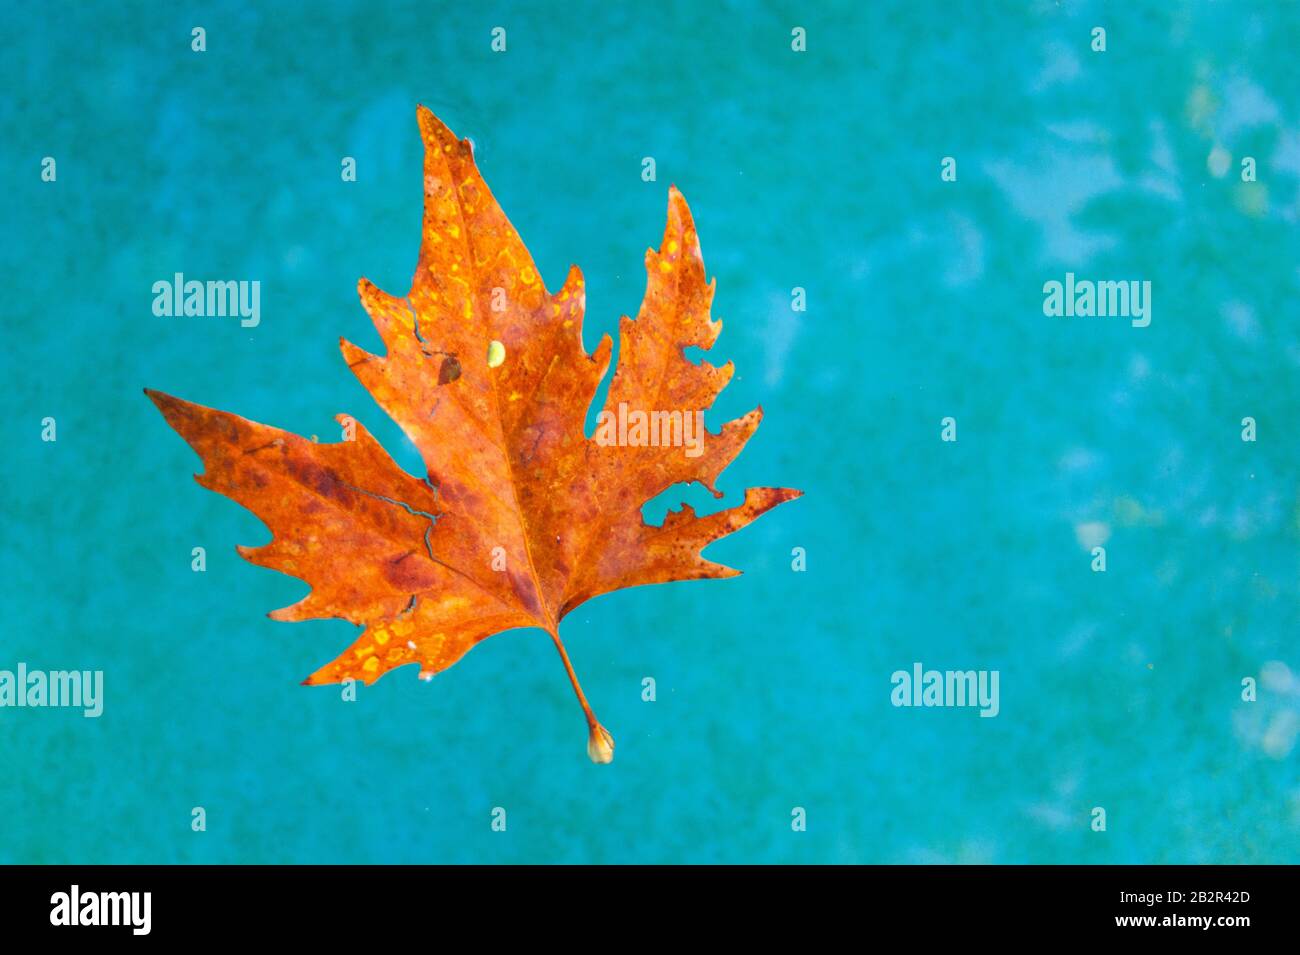 A beautiful orange leaf swims in clear turquoise water. Contrast. Autumn. Stock Photo